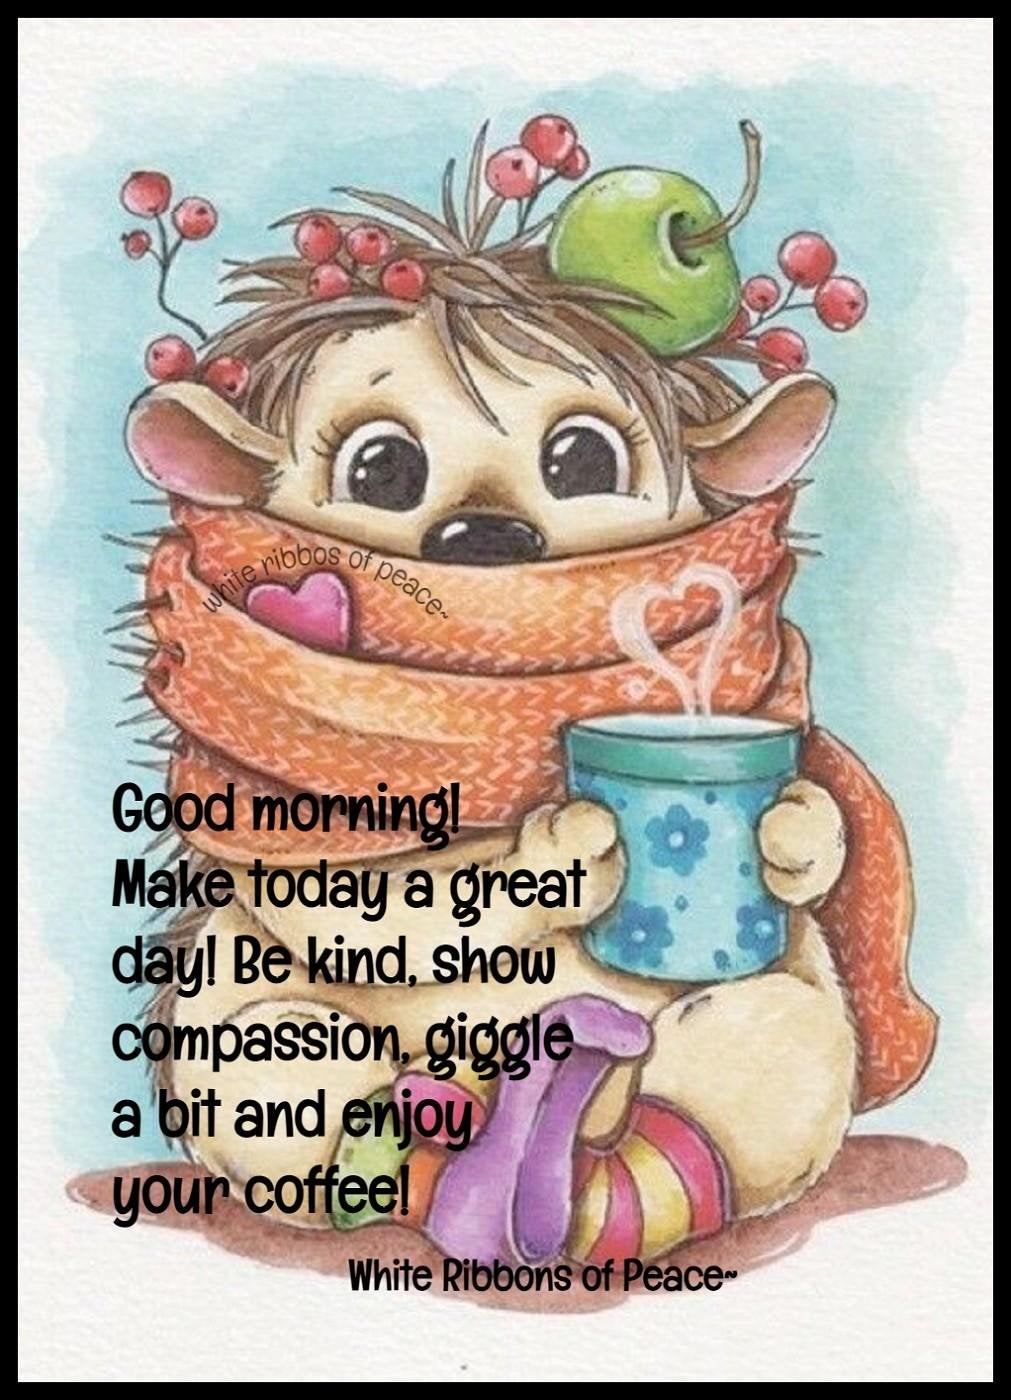 Good Morning Sunday Wishes & Happy, & that. | Knitting and Crochet Forum